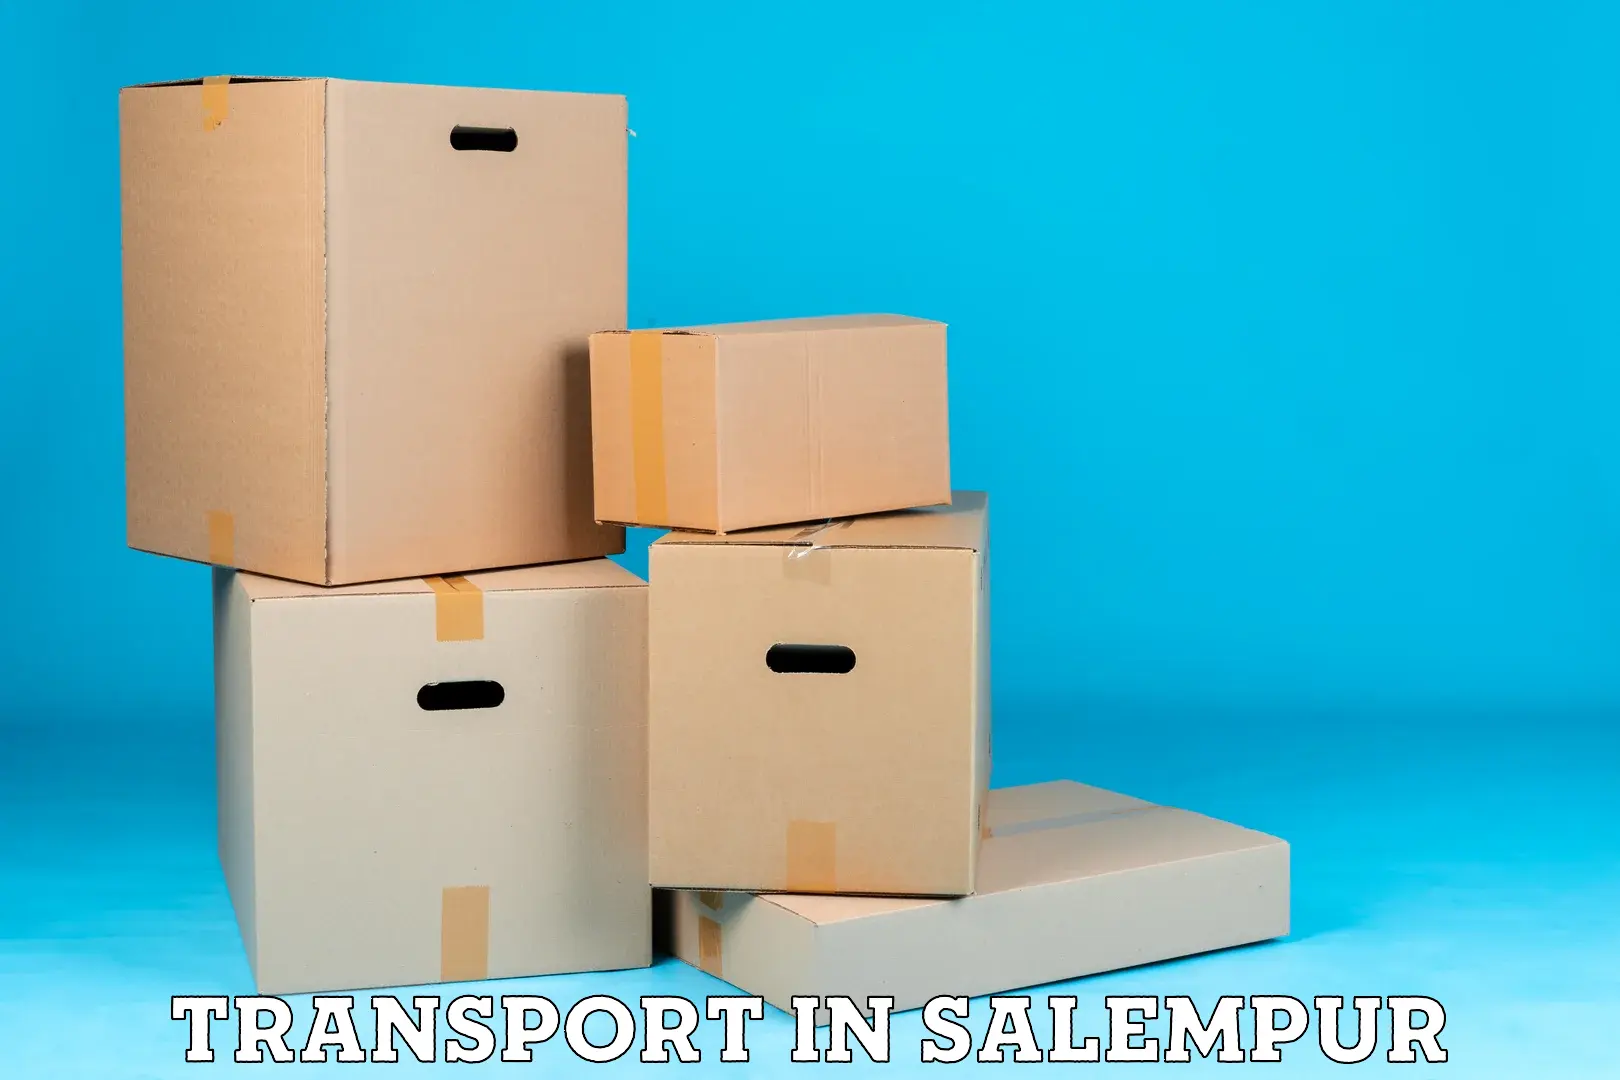 Container transportation services in Salempur